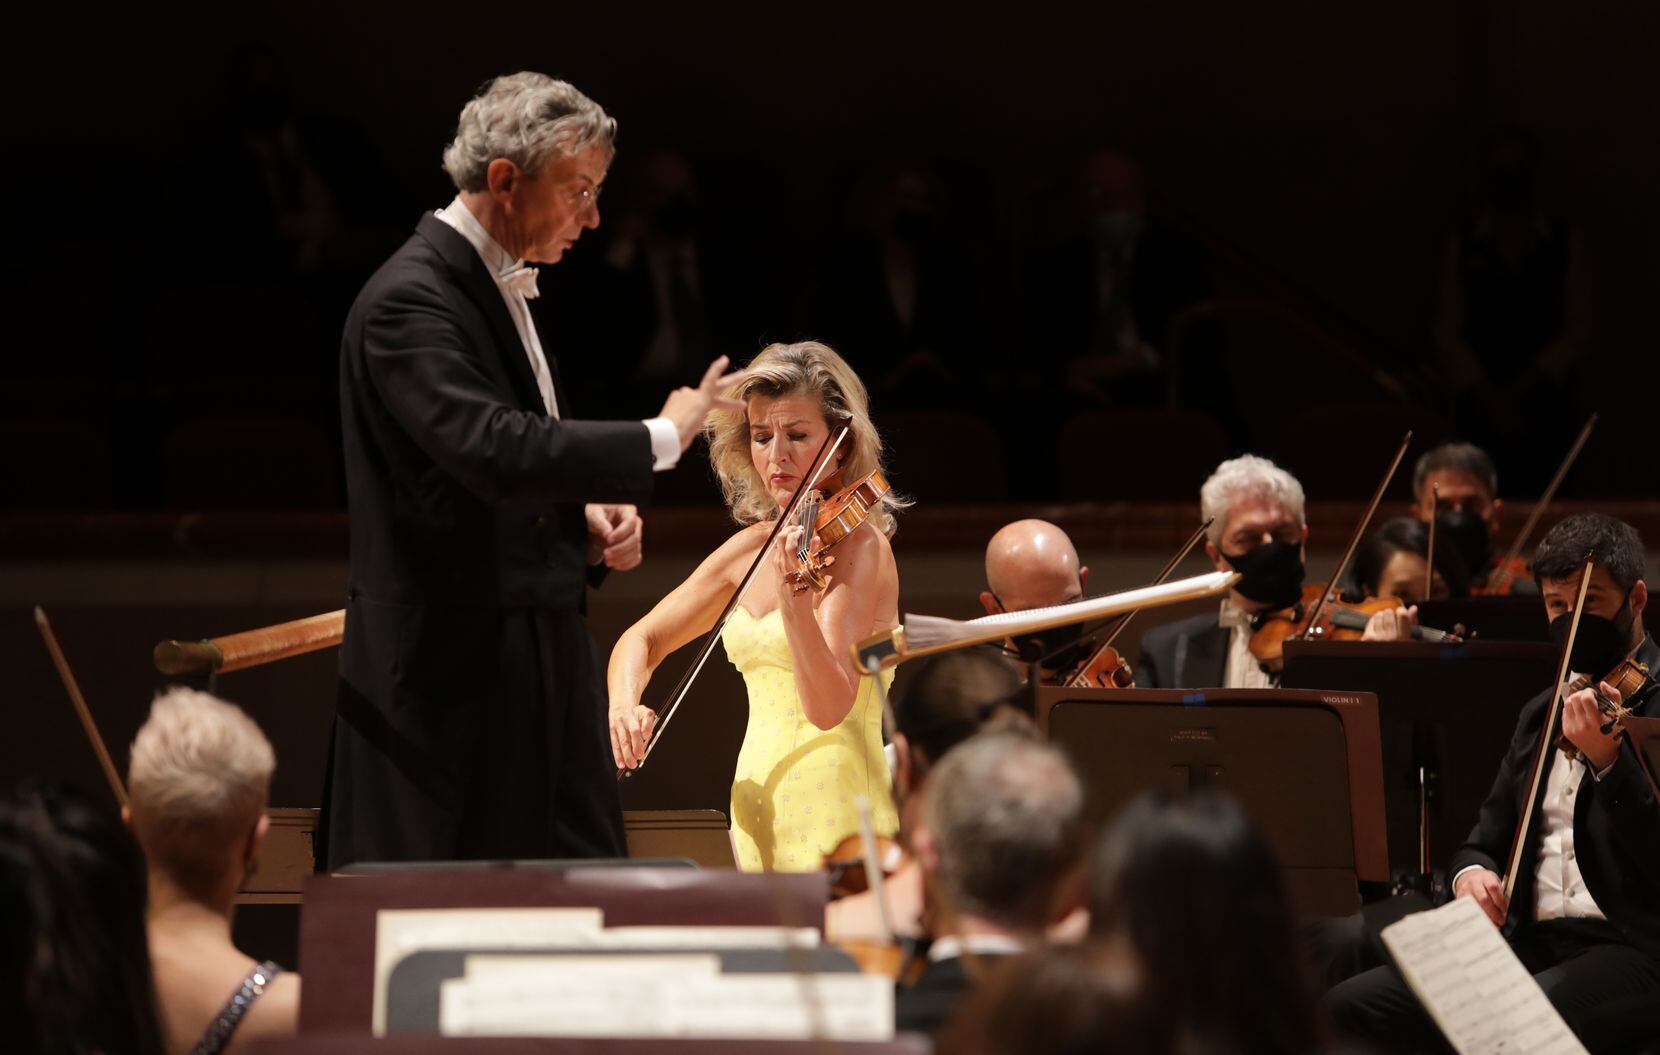 Violin soloist Anne-Sophie Mutter and the Dallas Symphony Orchestra, directed by Fabio Luisi, perform at the Meyerson Symphony Center in Dallas, TX, on Sep. 25, 2021.  